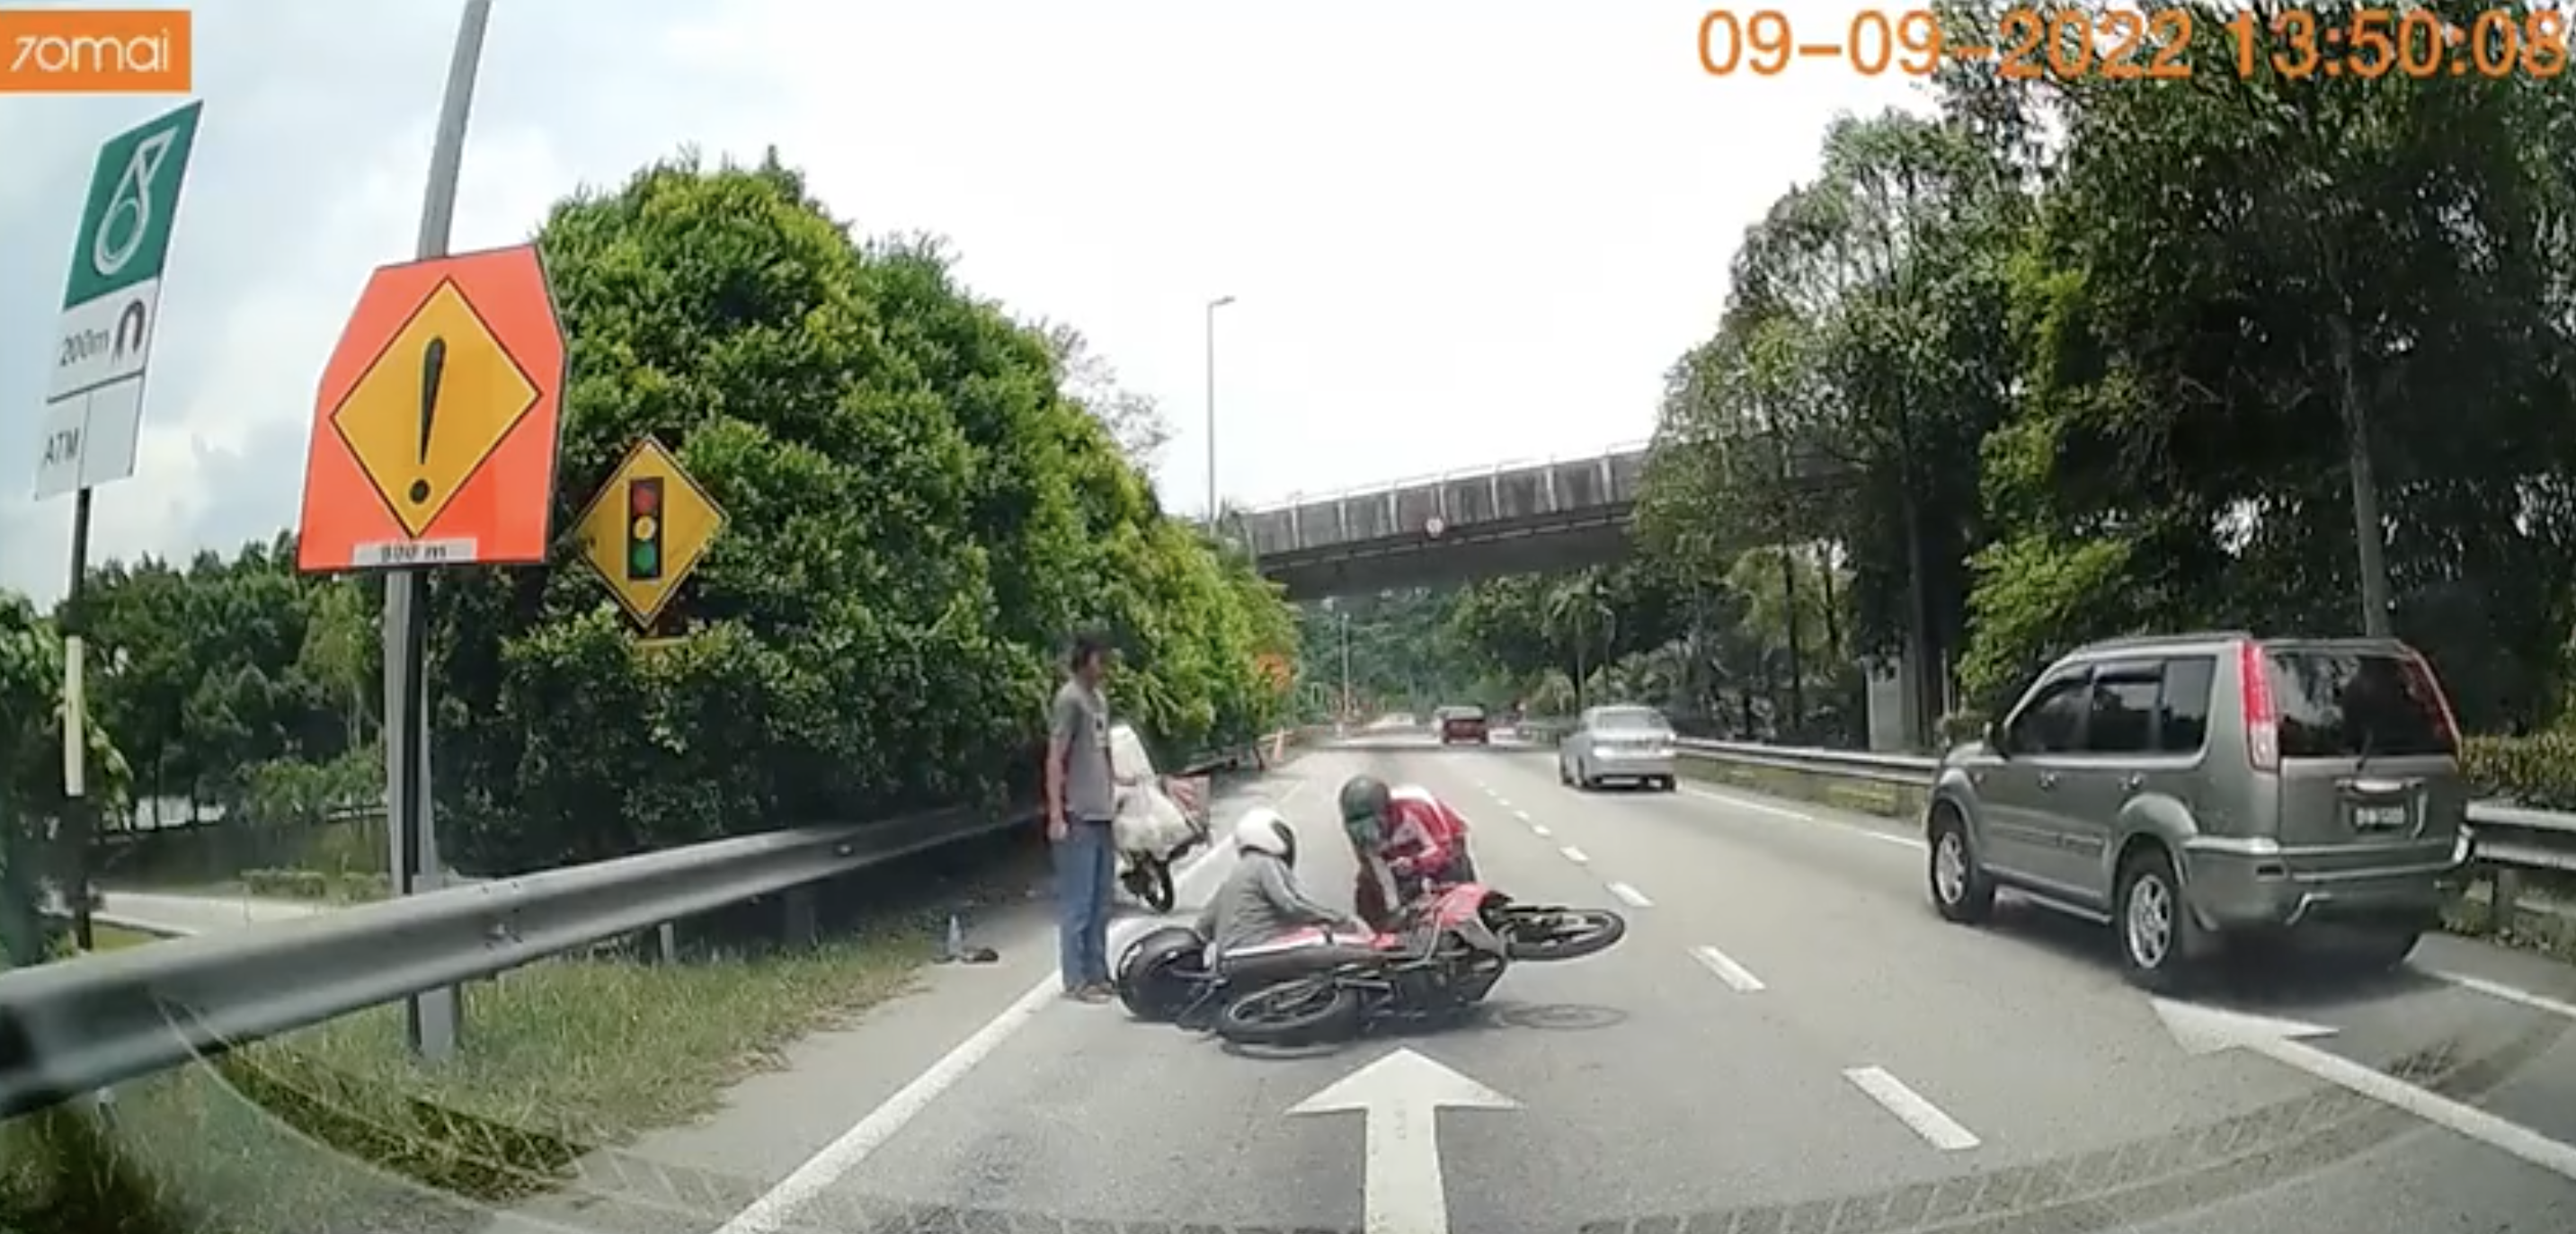 Perodua axia driver stops by roadside for pickled mango, causing hit and run accident | weirdkaya